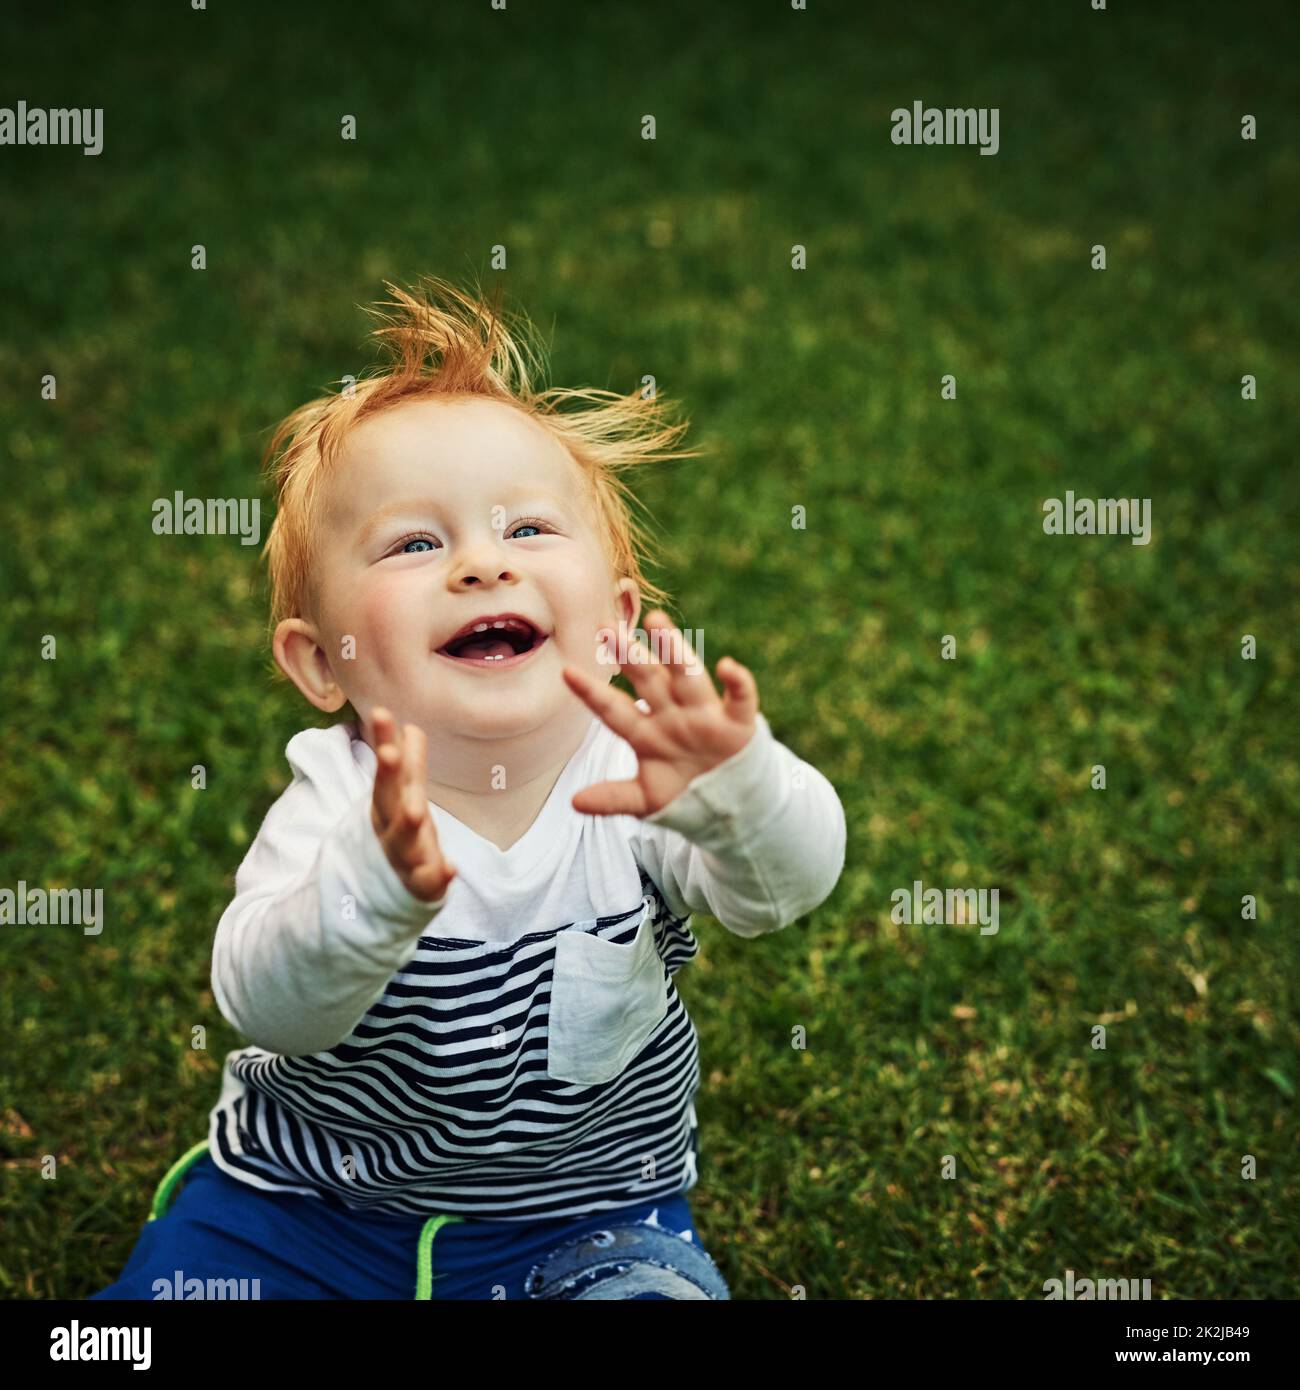 Feeling the joy. Shot of an adorable little boy playing in the backyard. Stock Photo